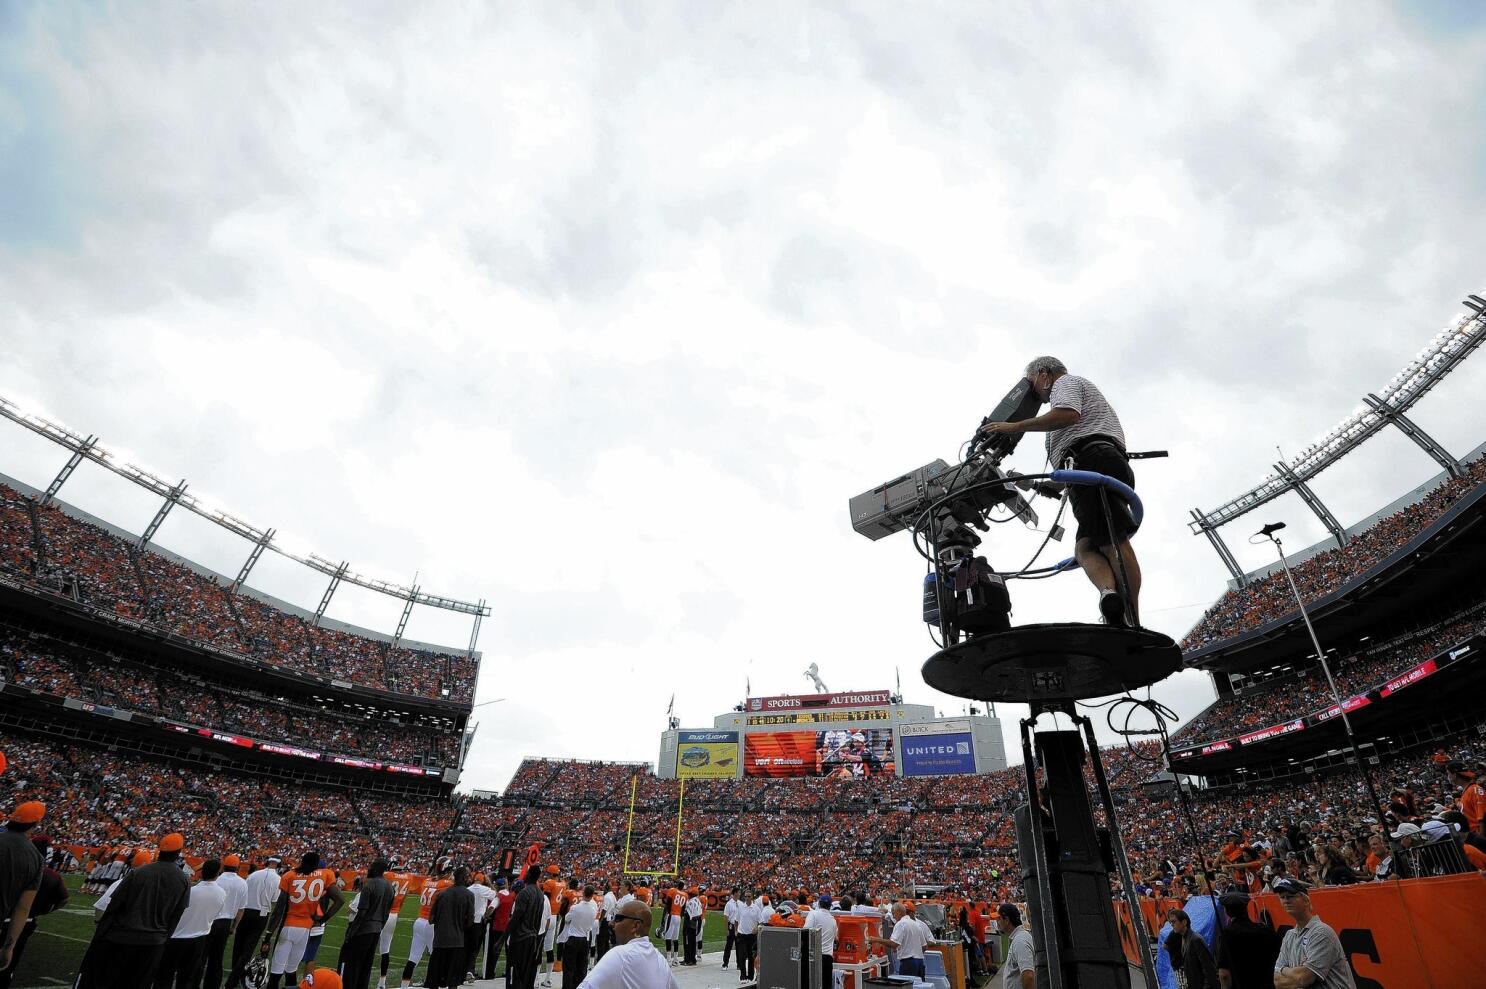 Why DirecTV Needs To Fight To Keep Its Exclusive NFL Sunday Ticket Package